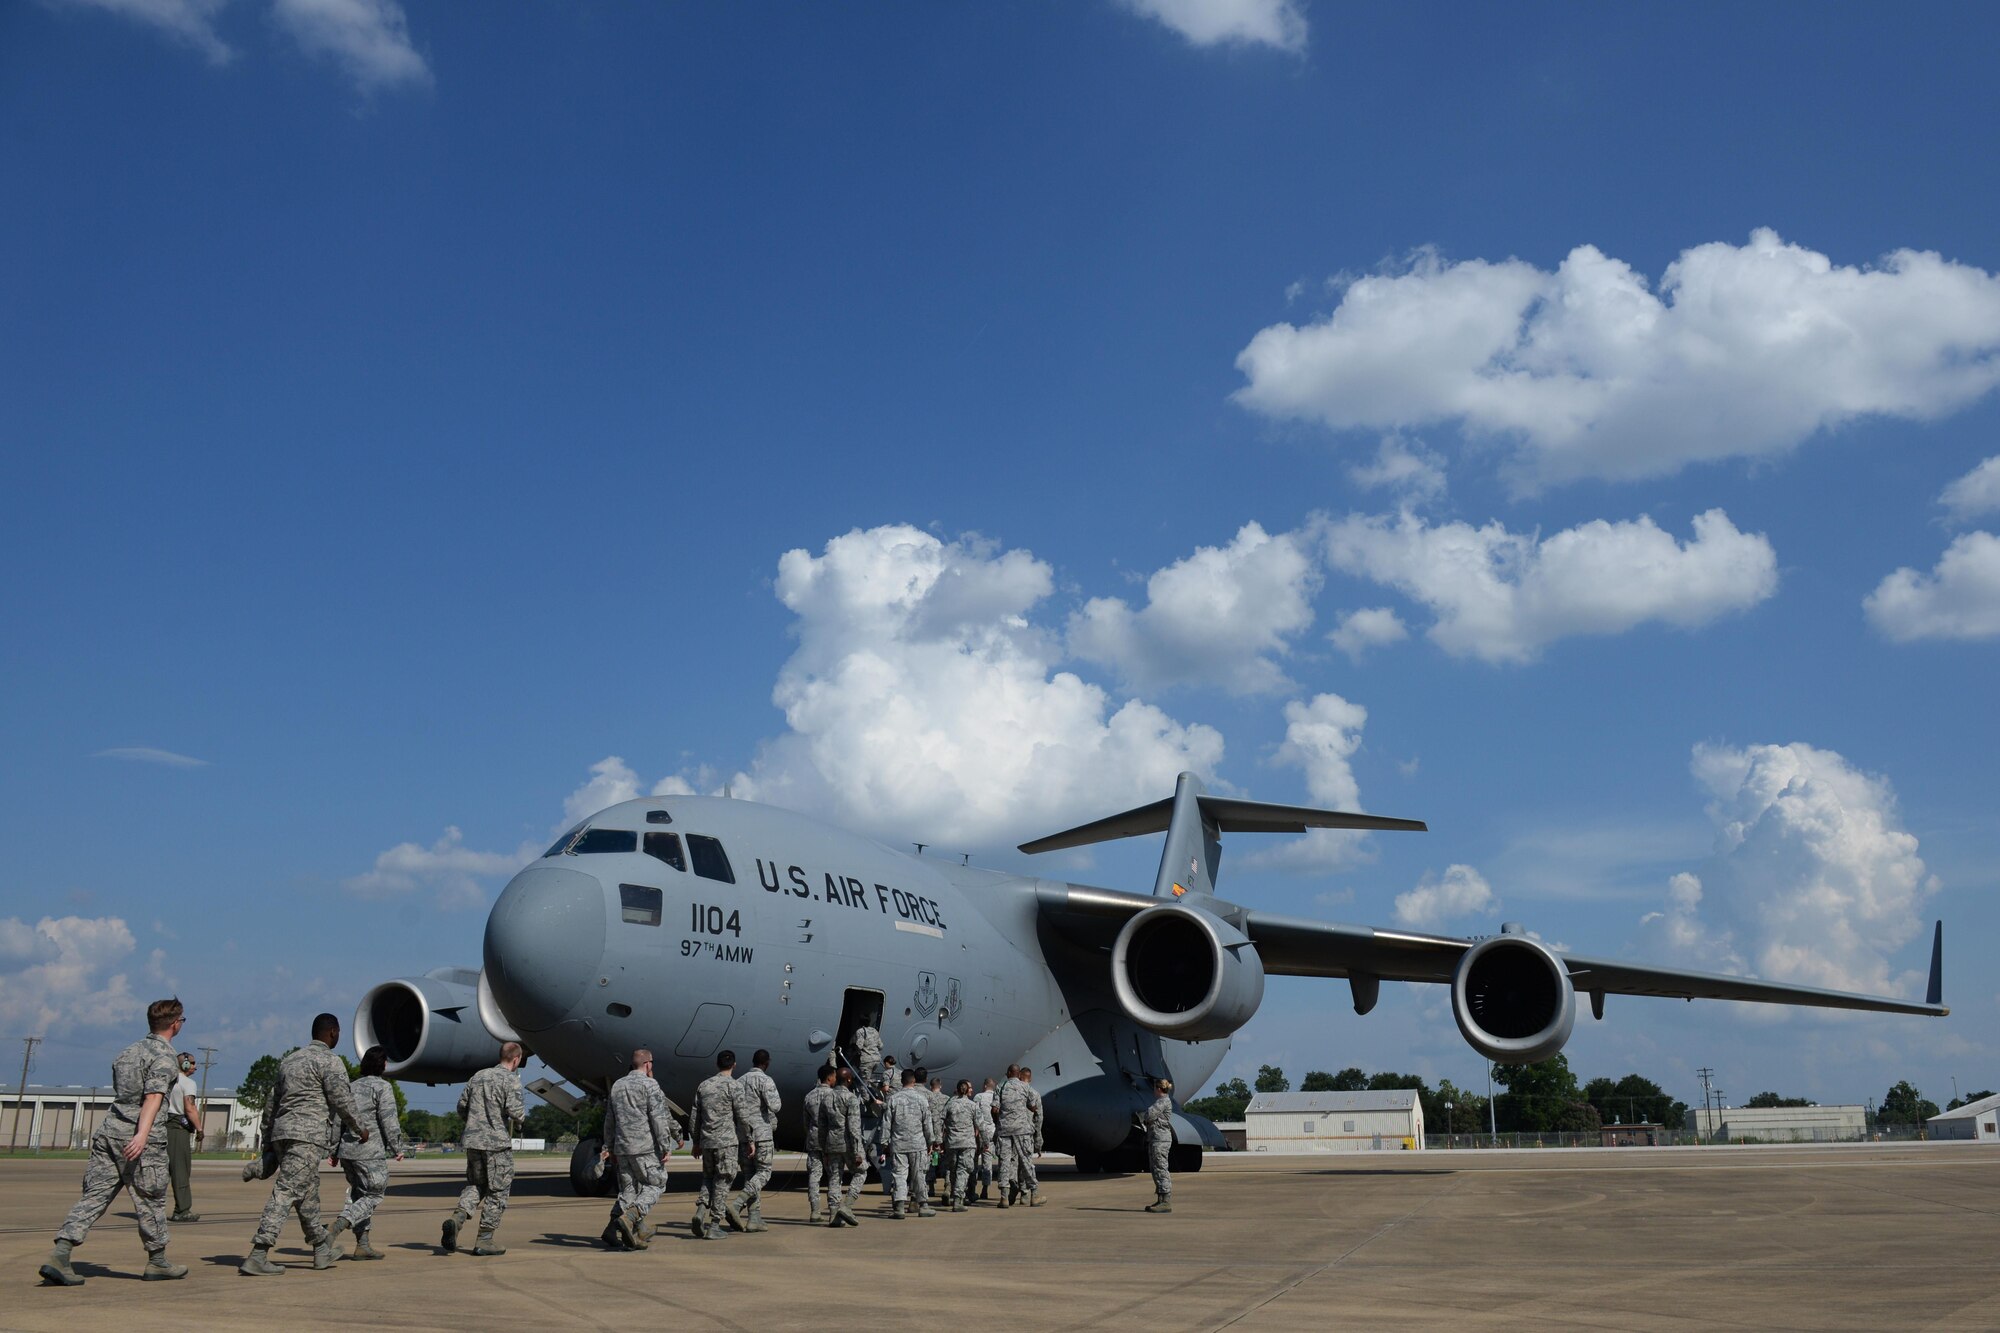 Members of Keesler Air Force Base board a C-17 Globemaster III for an incentive flight Aug. 4, 2016, at Fort Polk, La. The incentive flight was part of a weeklong hurricane exercises to prepare Keesler for the current hurricane season.  (Air Force Photo by Airman 1st Class Travis Beihl/Released)